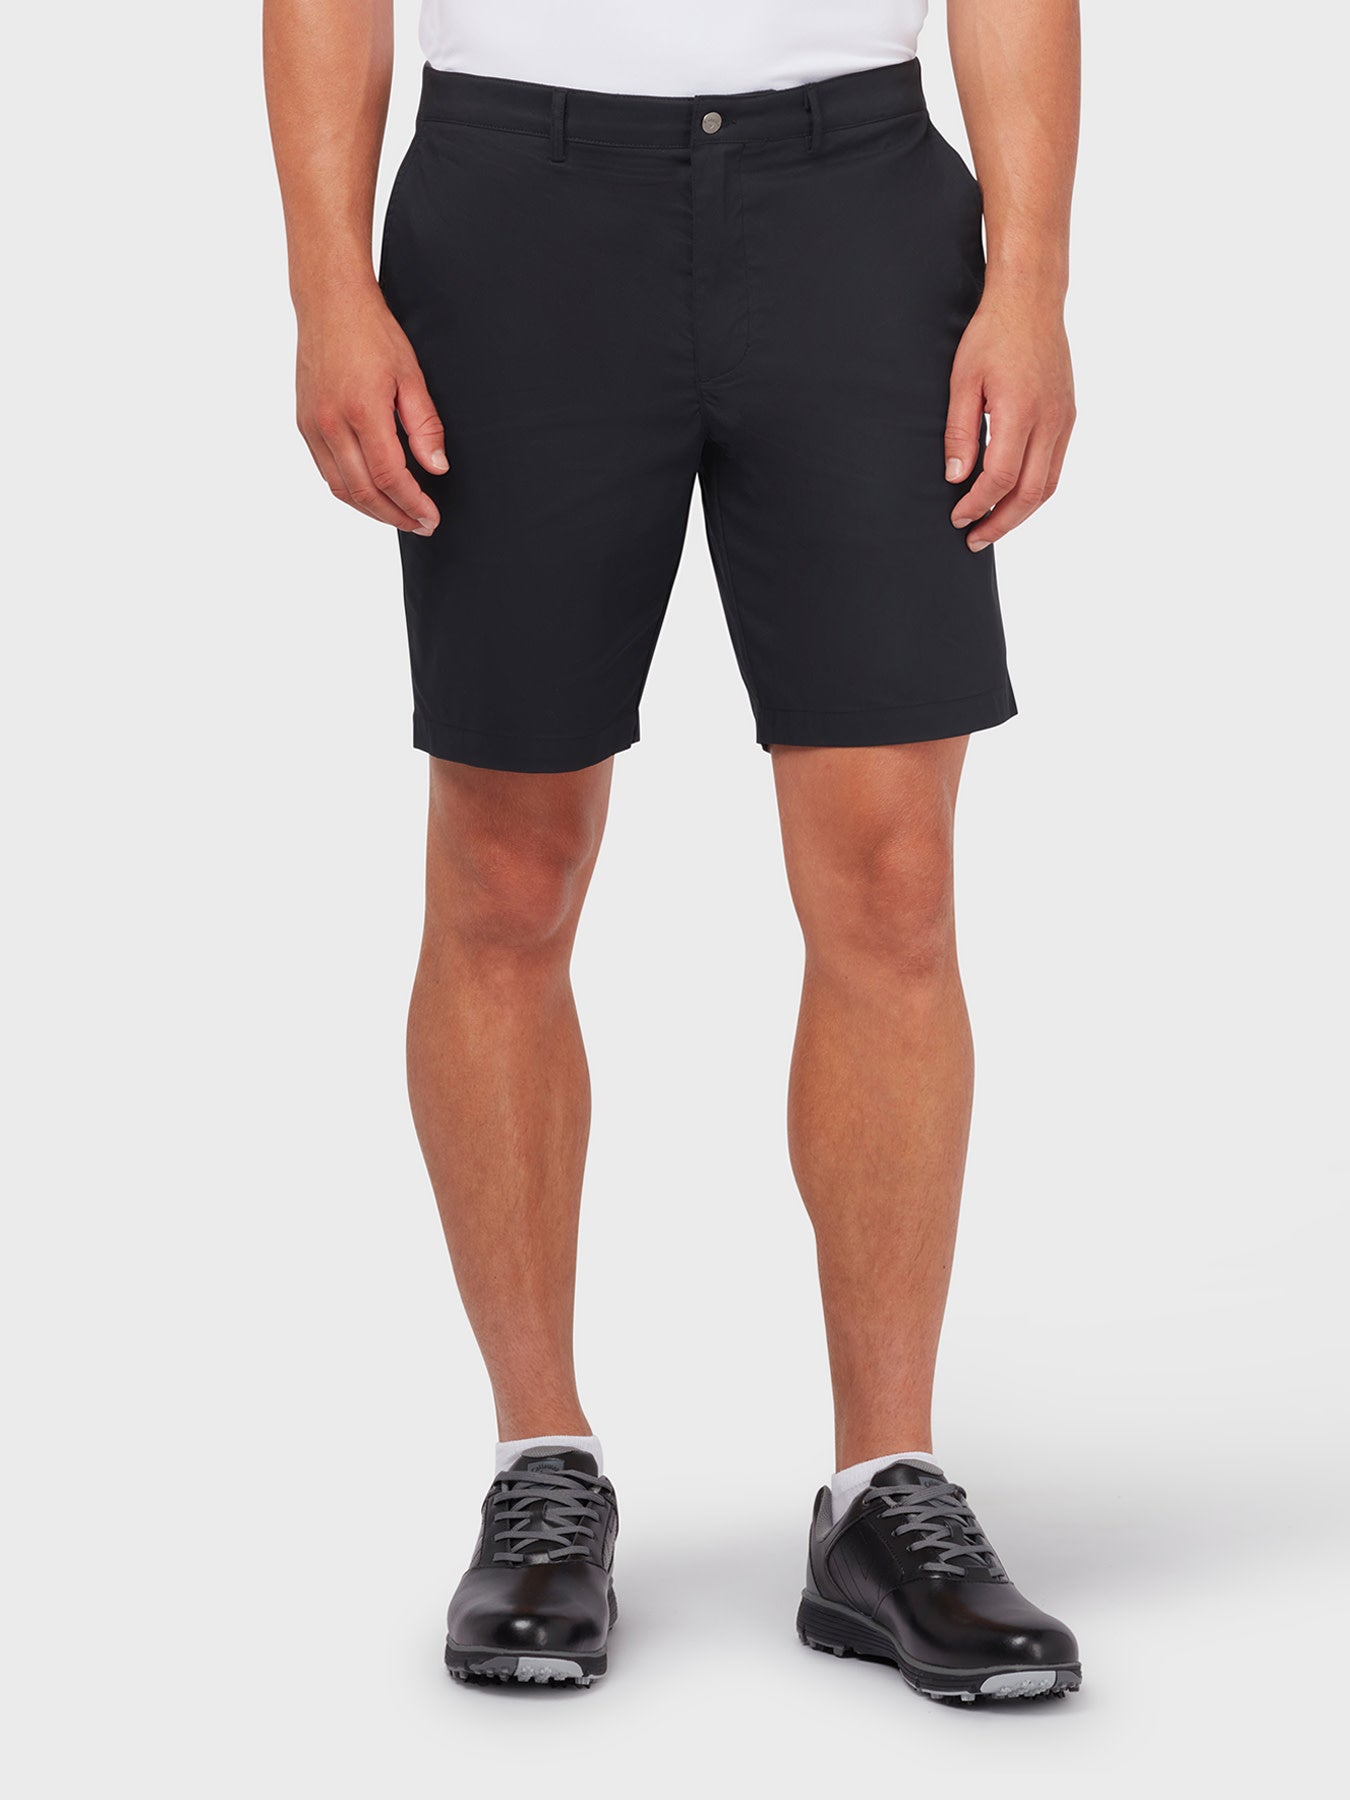 View X Series Flat Fronted Short In Caviar Caviar 40 information